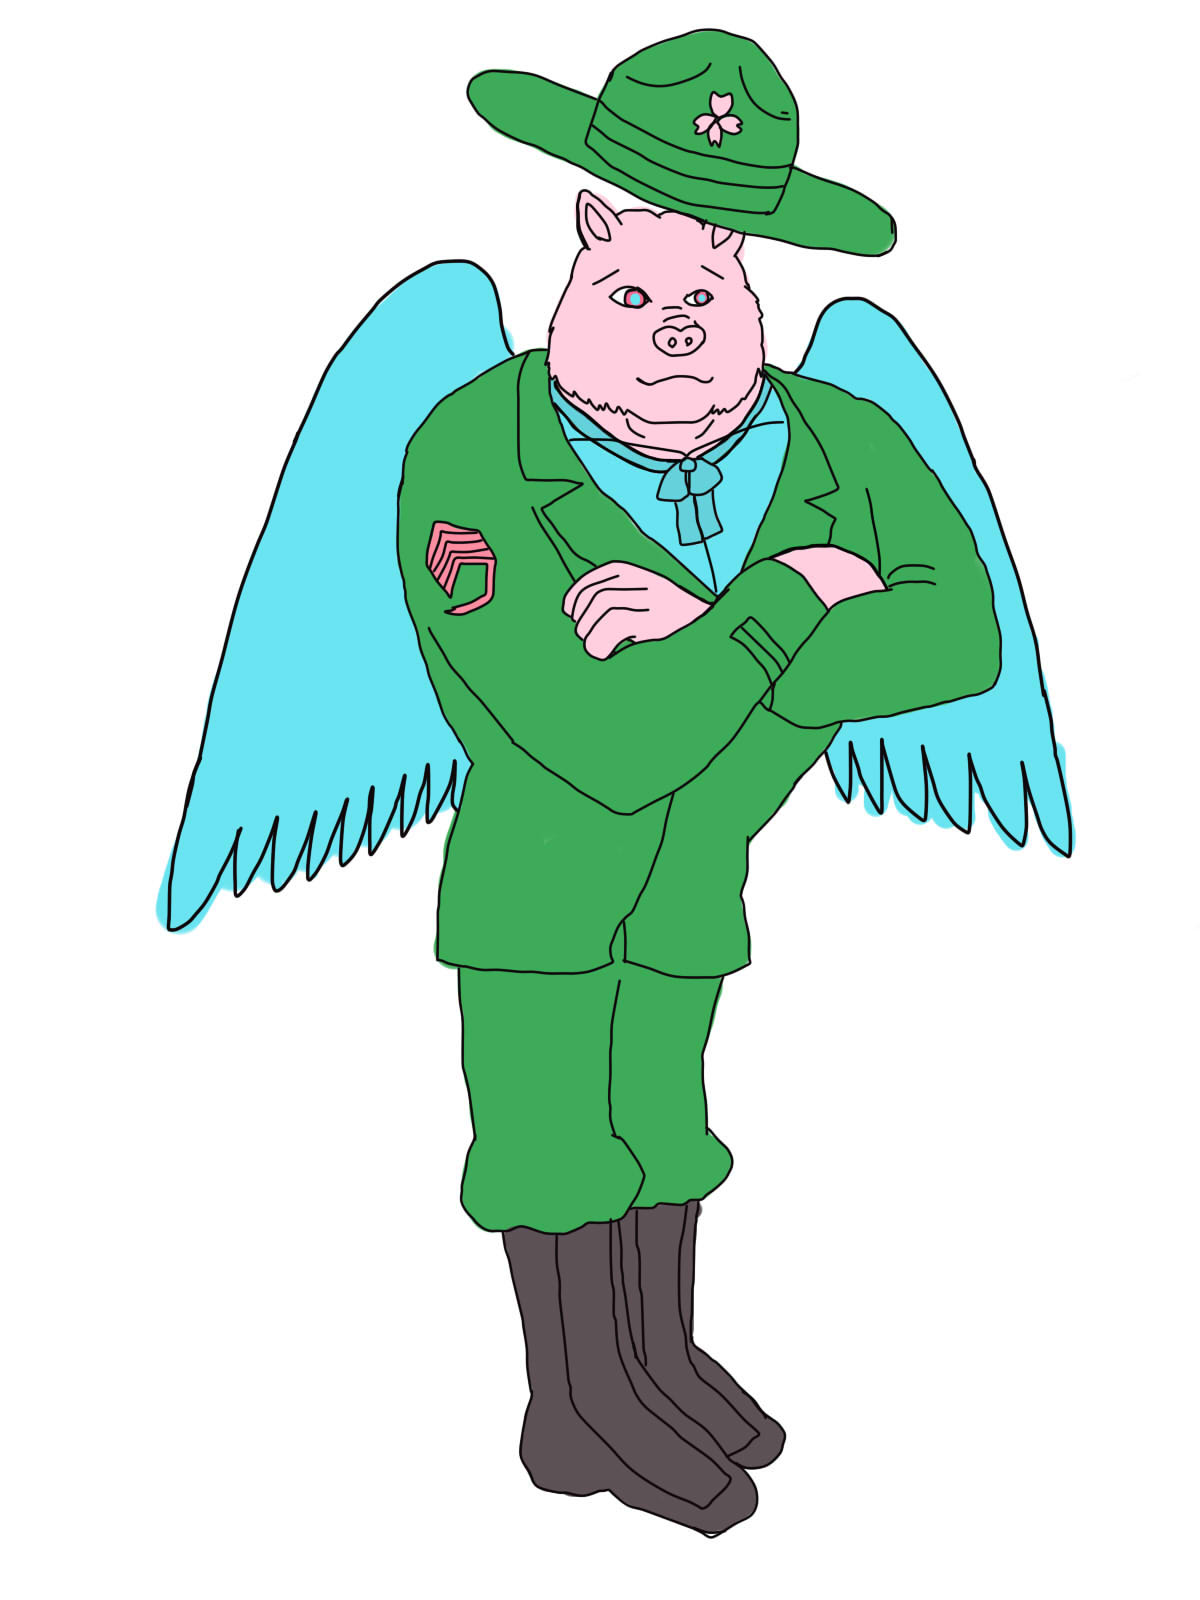 Arm clipart cartoon character. Image of a sergeant